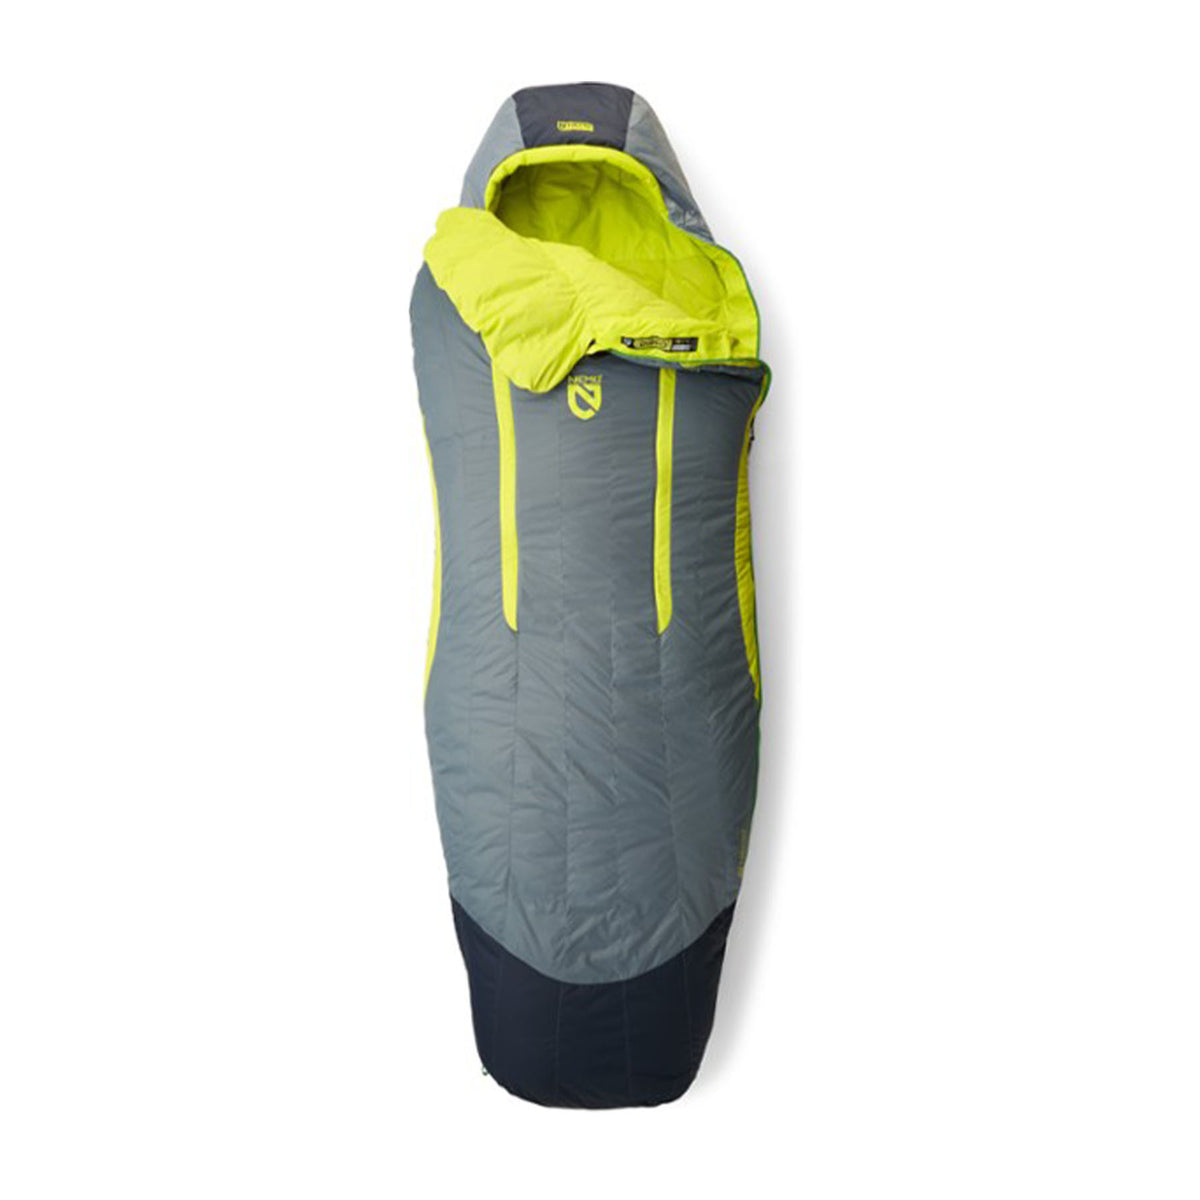 Hero image featuring a top down view of the Nemo Men's Disco 30 degree sleeping bag in spark fortress